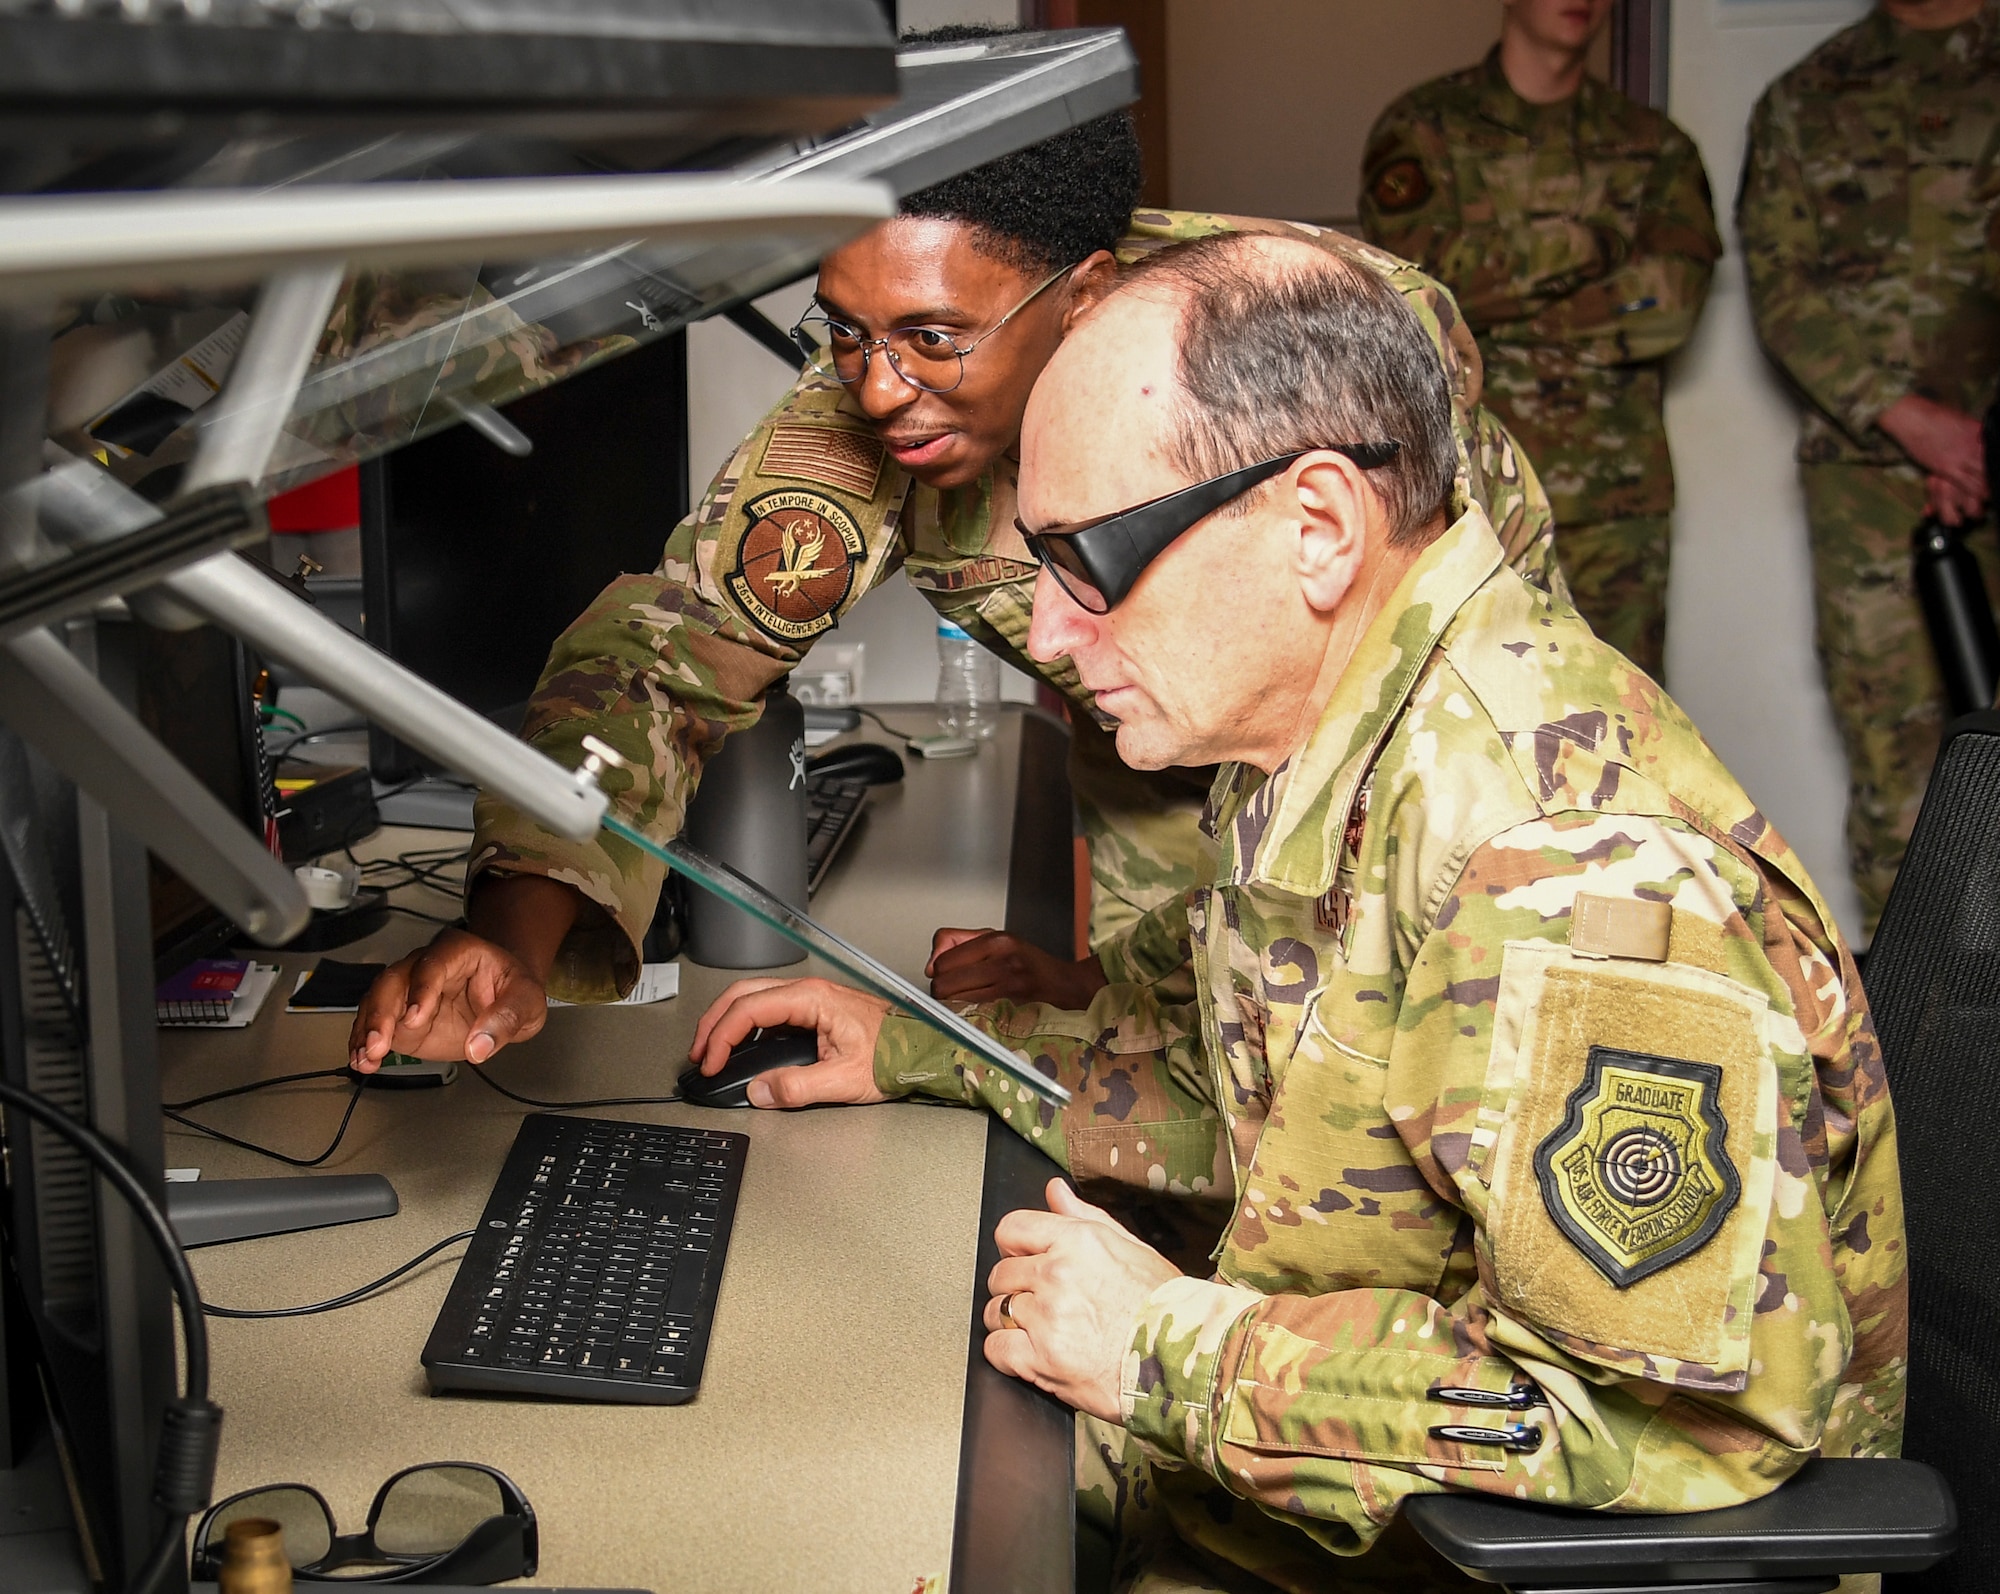 Airman demonstrates how to use a 3D monitor to another individual.